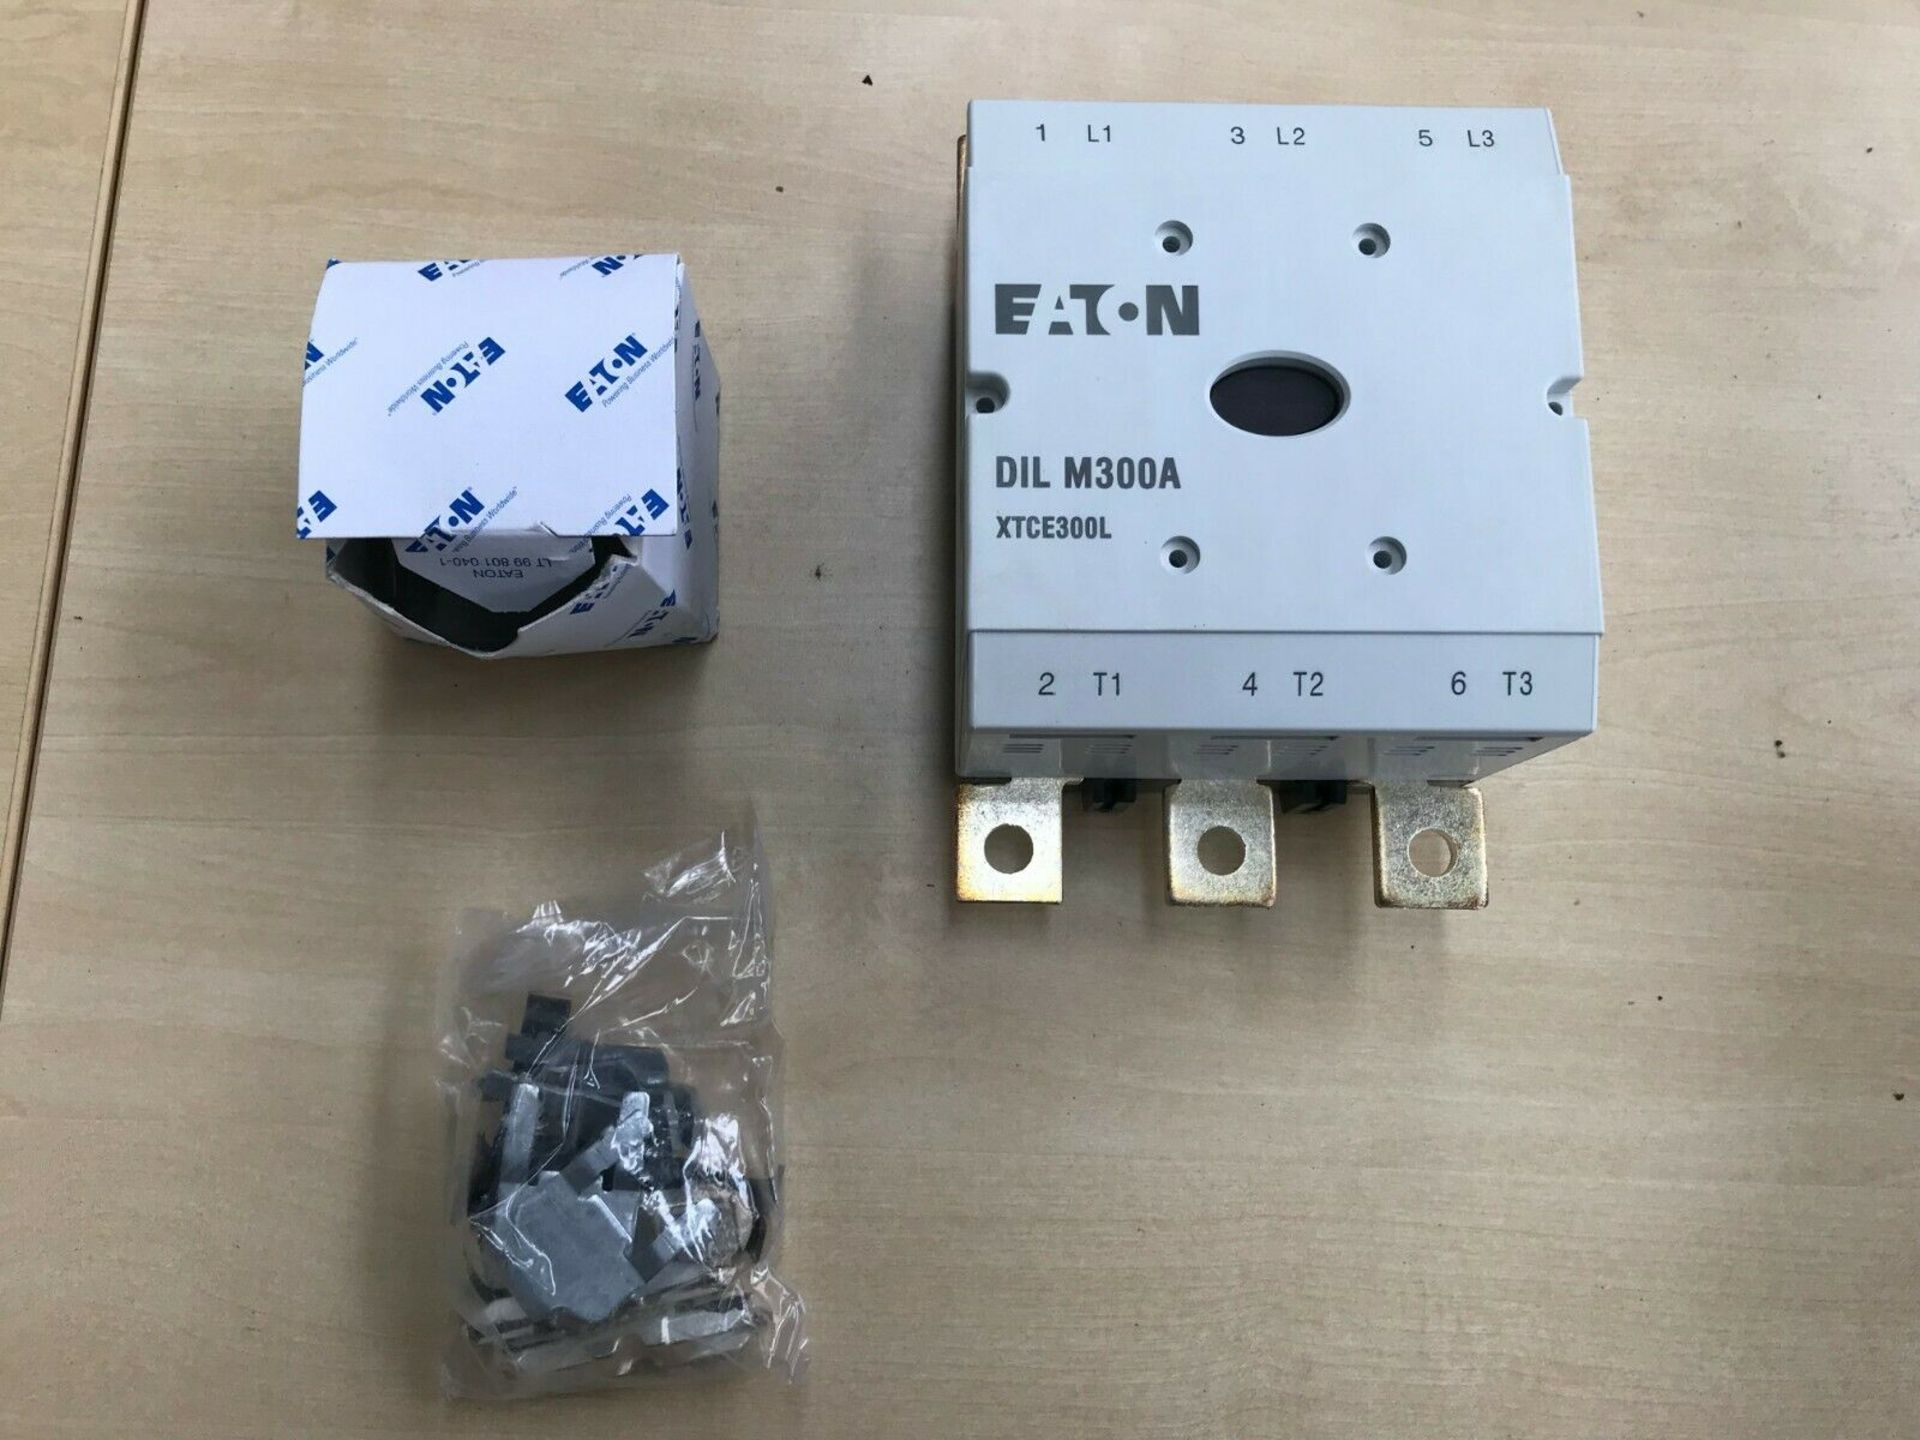 DILM300A-XOCT 139559 Eaton Moeller Contactor